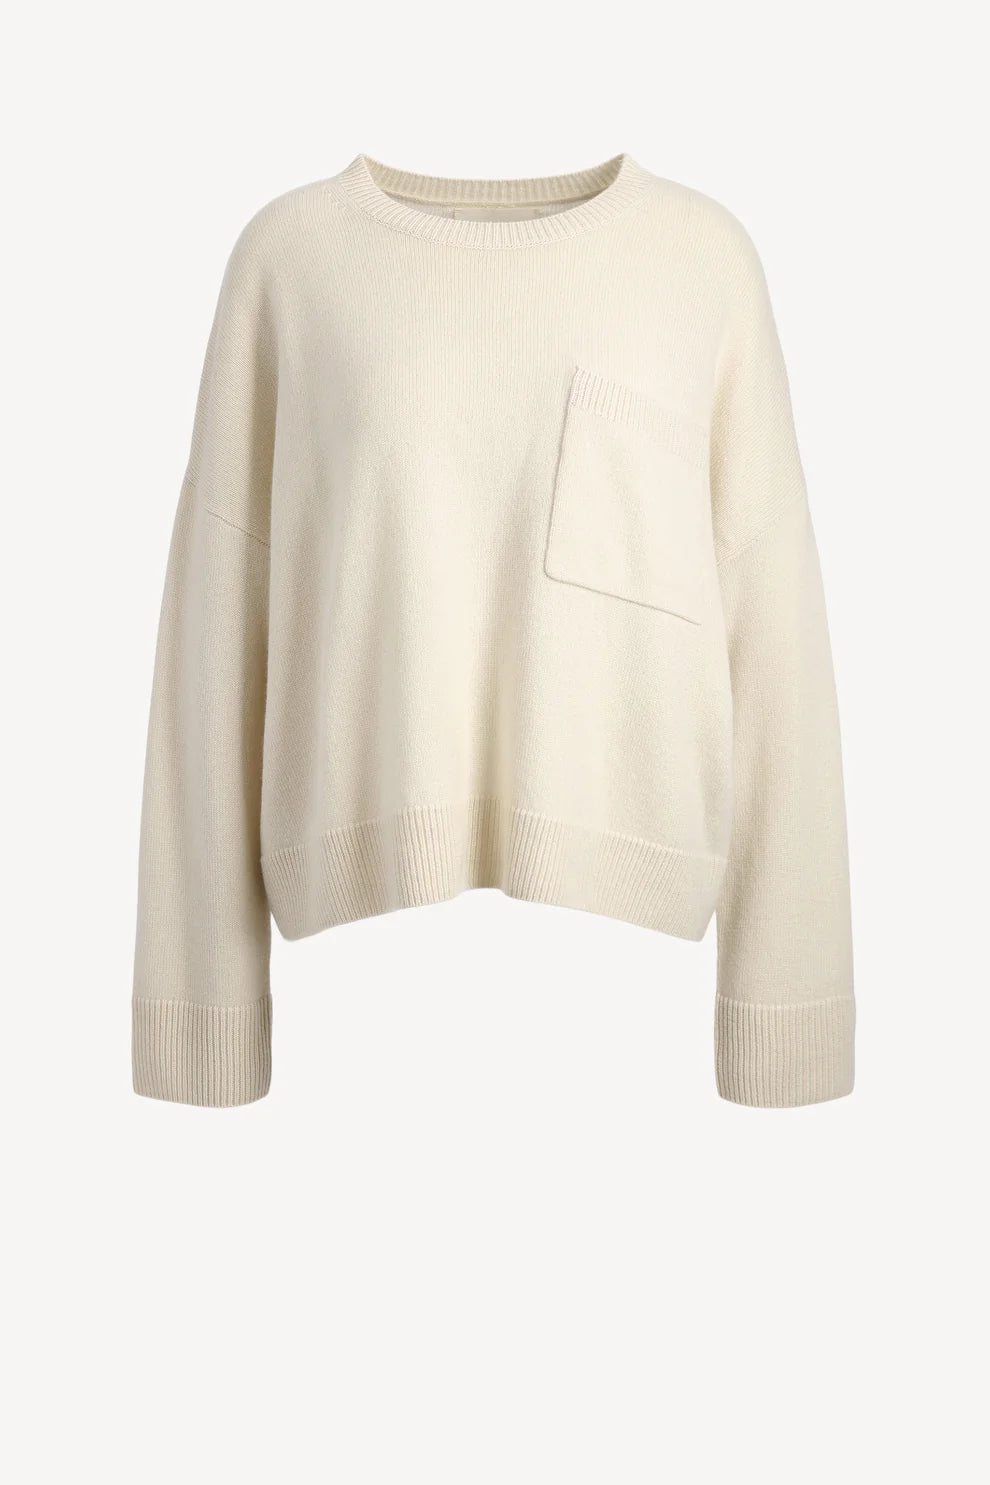 Lisa Yang Andie Cashmere Sweater